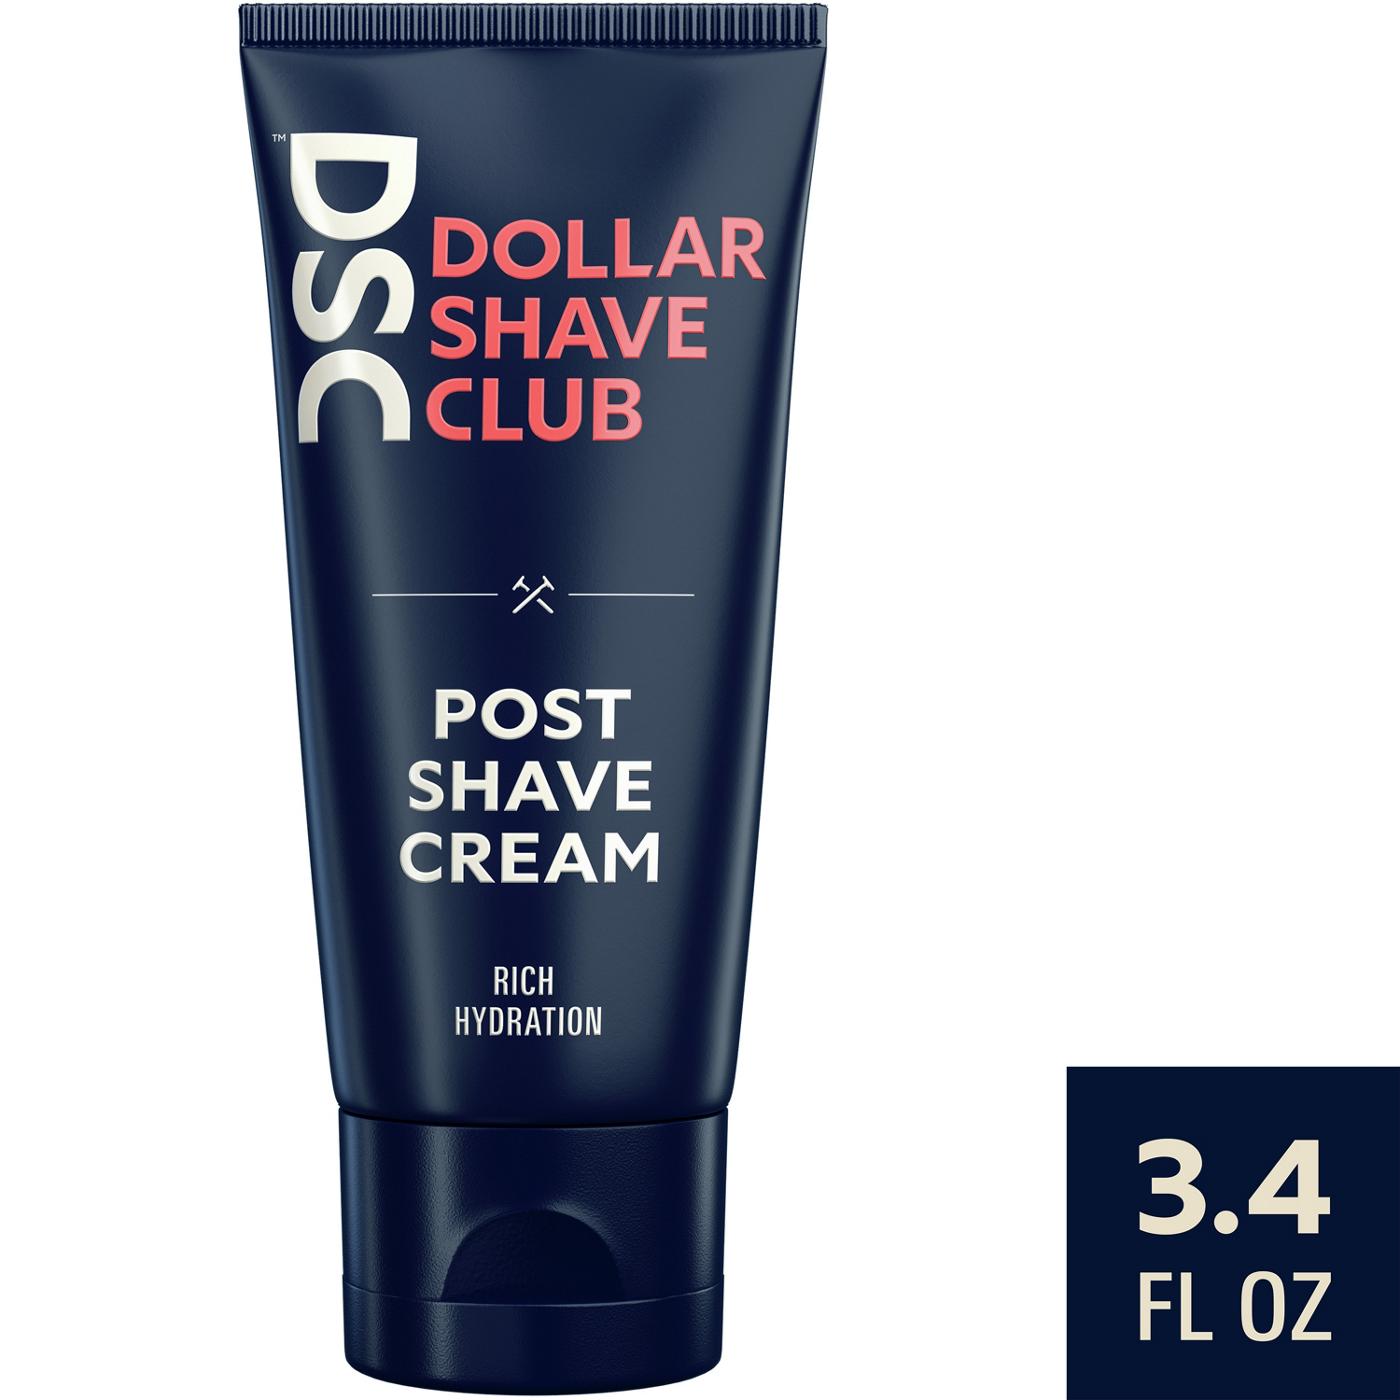 Dollar Shave Club Post Shave Cream; image 6 of 7